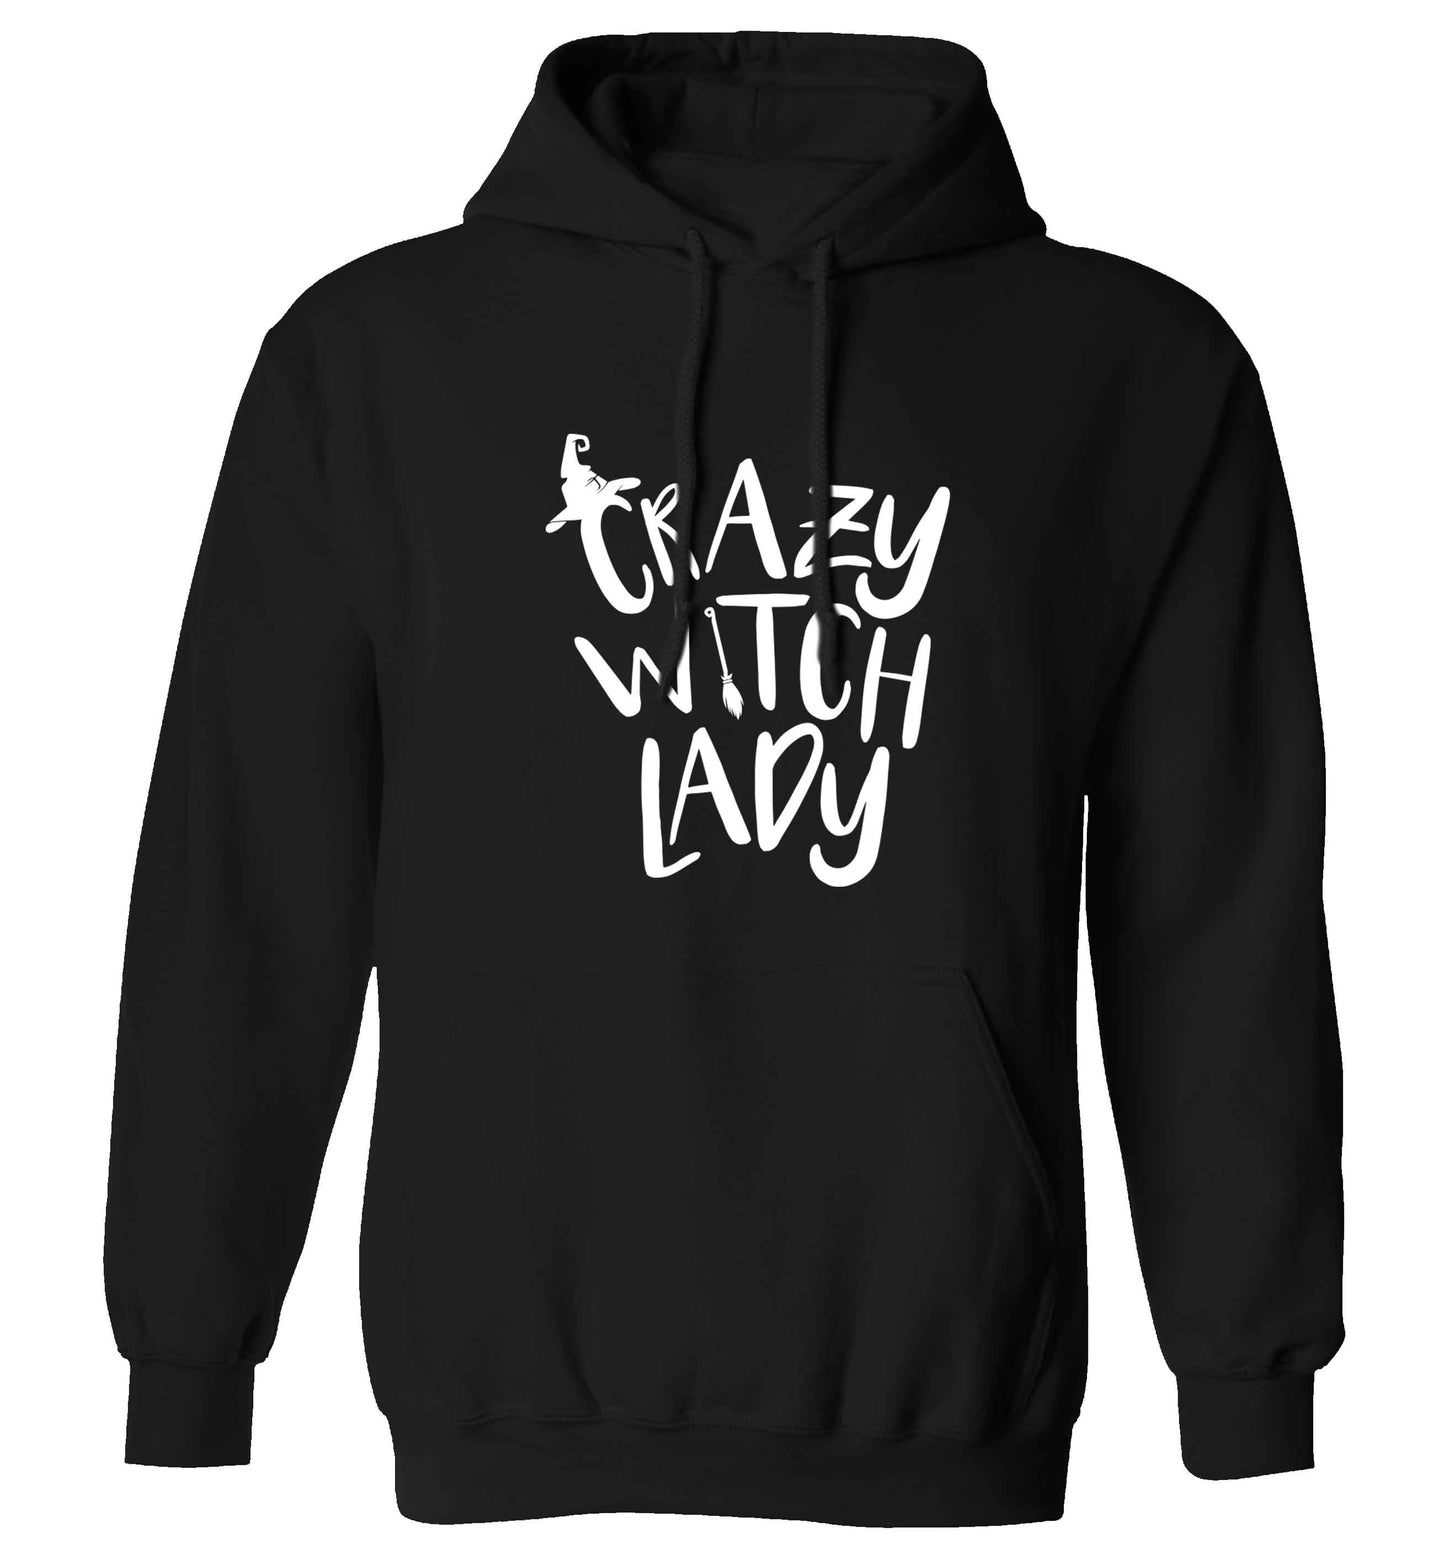 Crazy witch lady adults unisex black hoodie 2XL